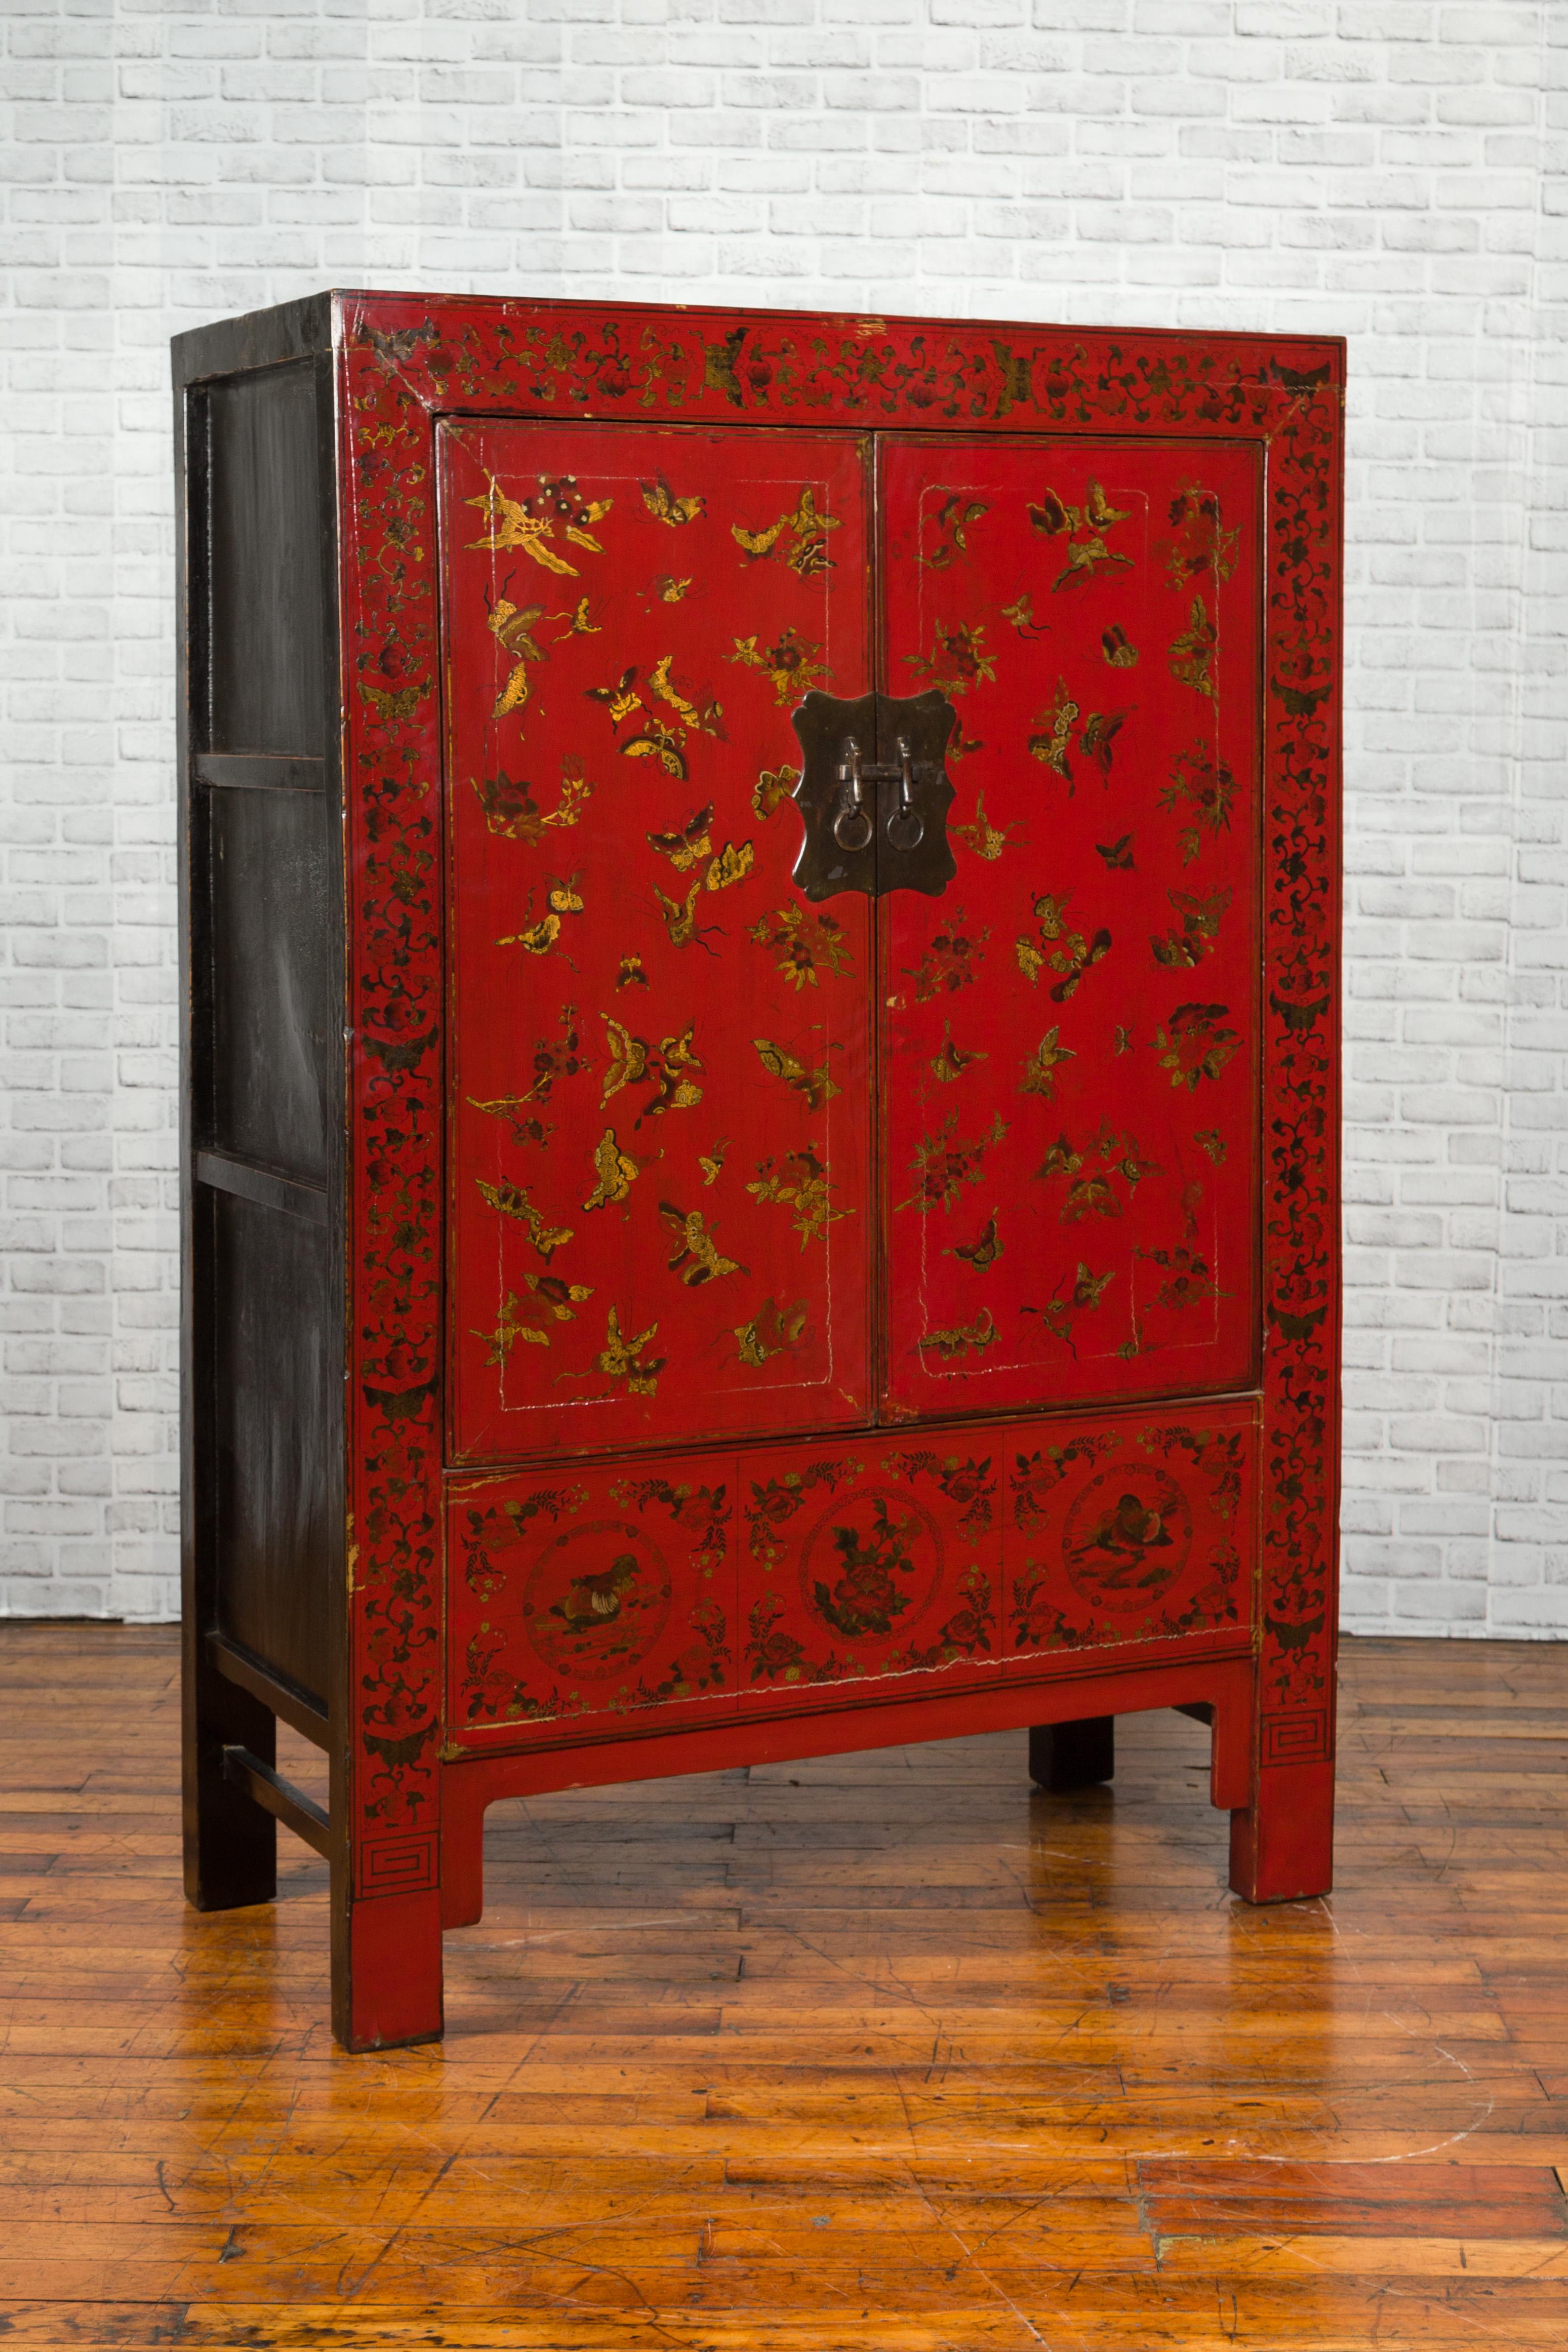 A Chinese Qing dynasty period red lacquered cabinet from the 19th century, with gilt chinoiserie motifs and scalloped brass hardware. Created in China during the Qing dynasty, this cabinet captures our attention with its red lacquered finish